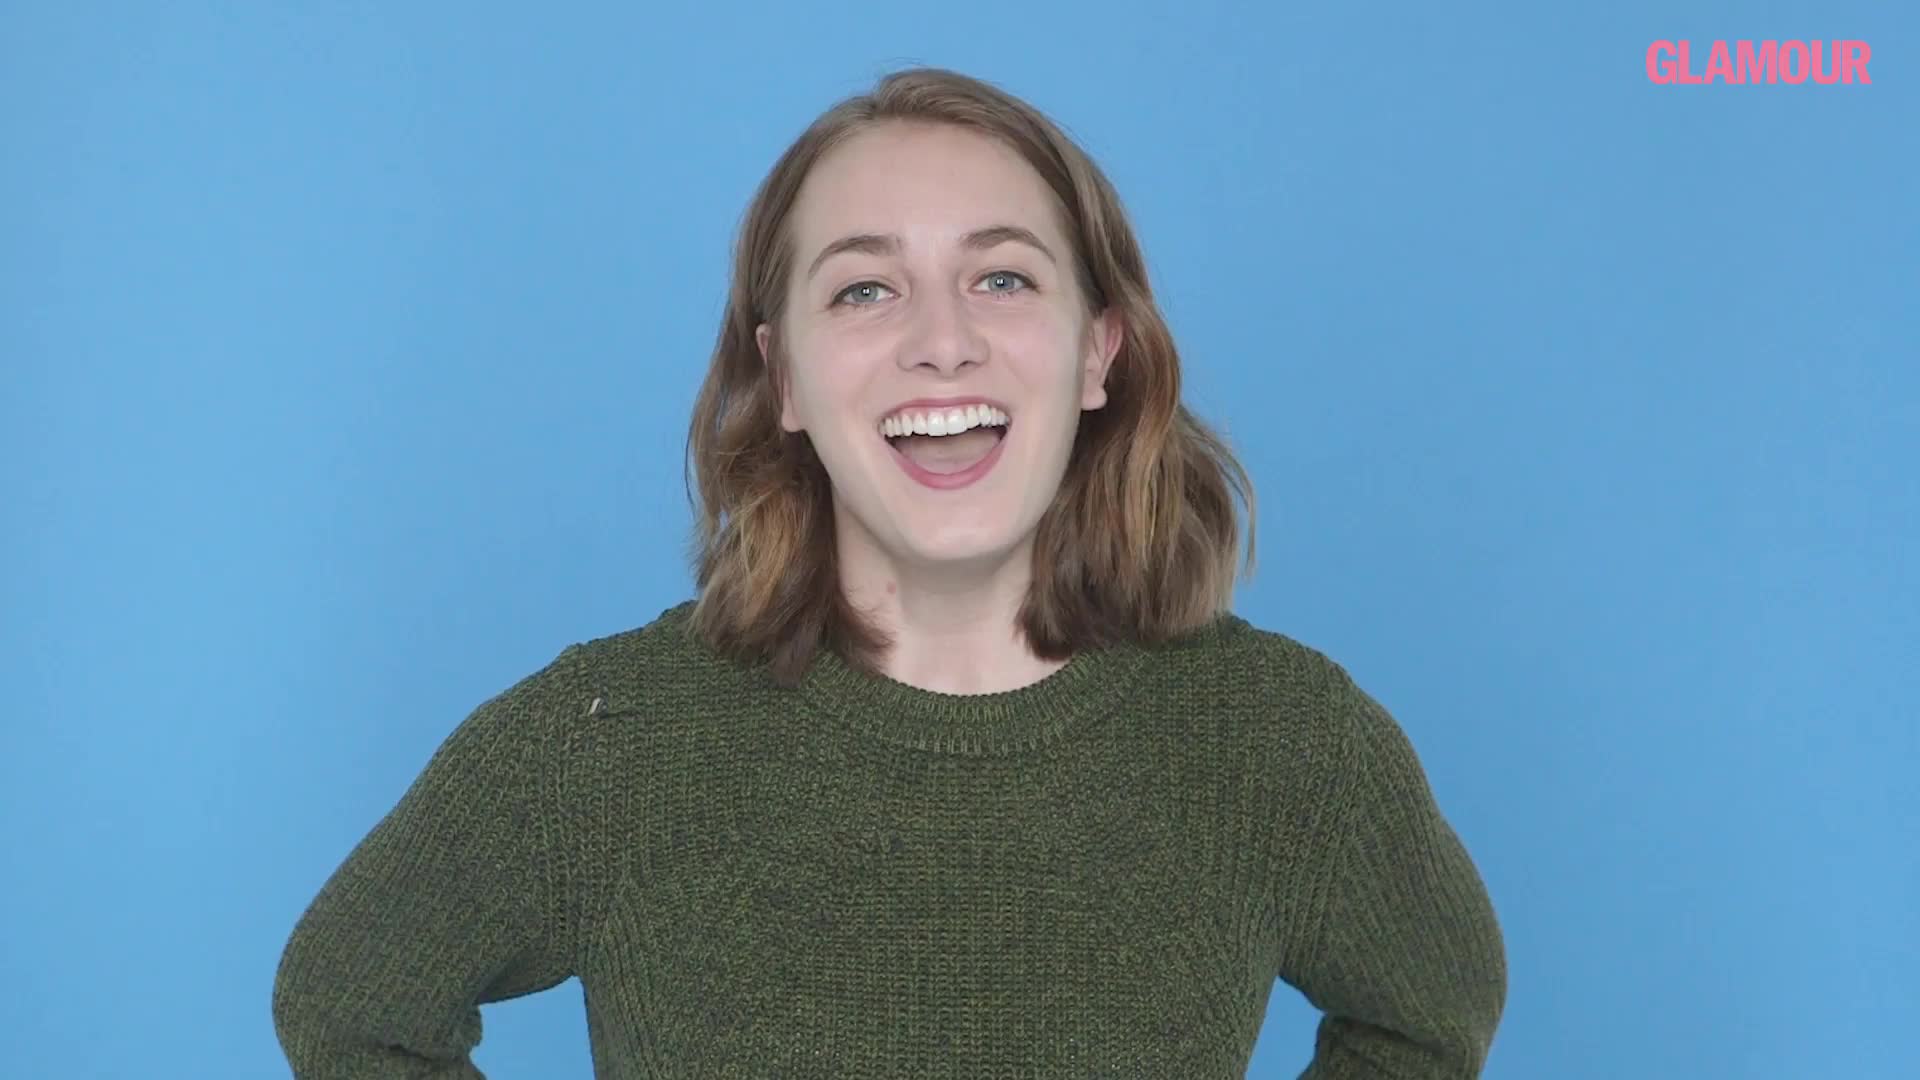 16 Women Talk About Their First Time Having